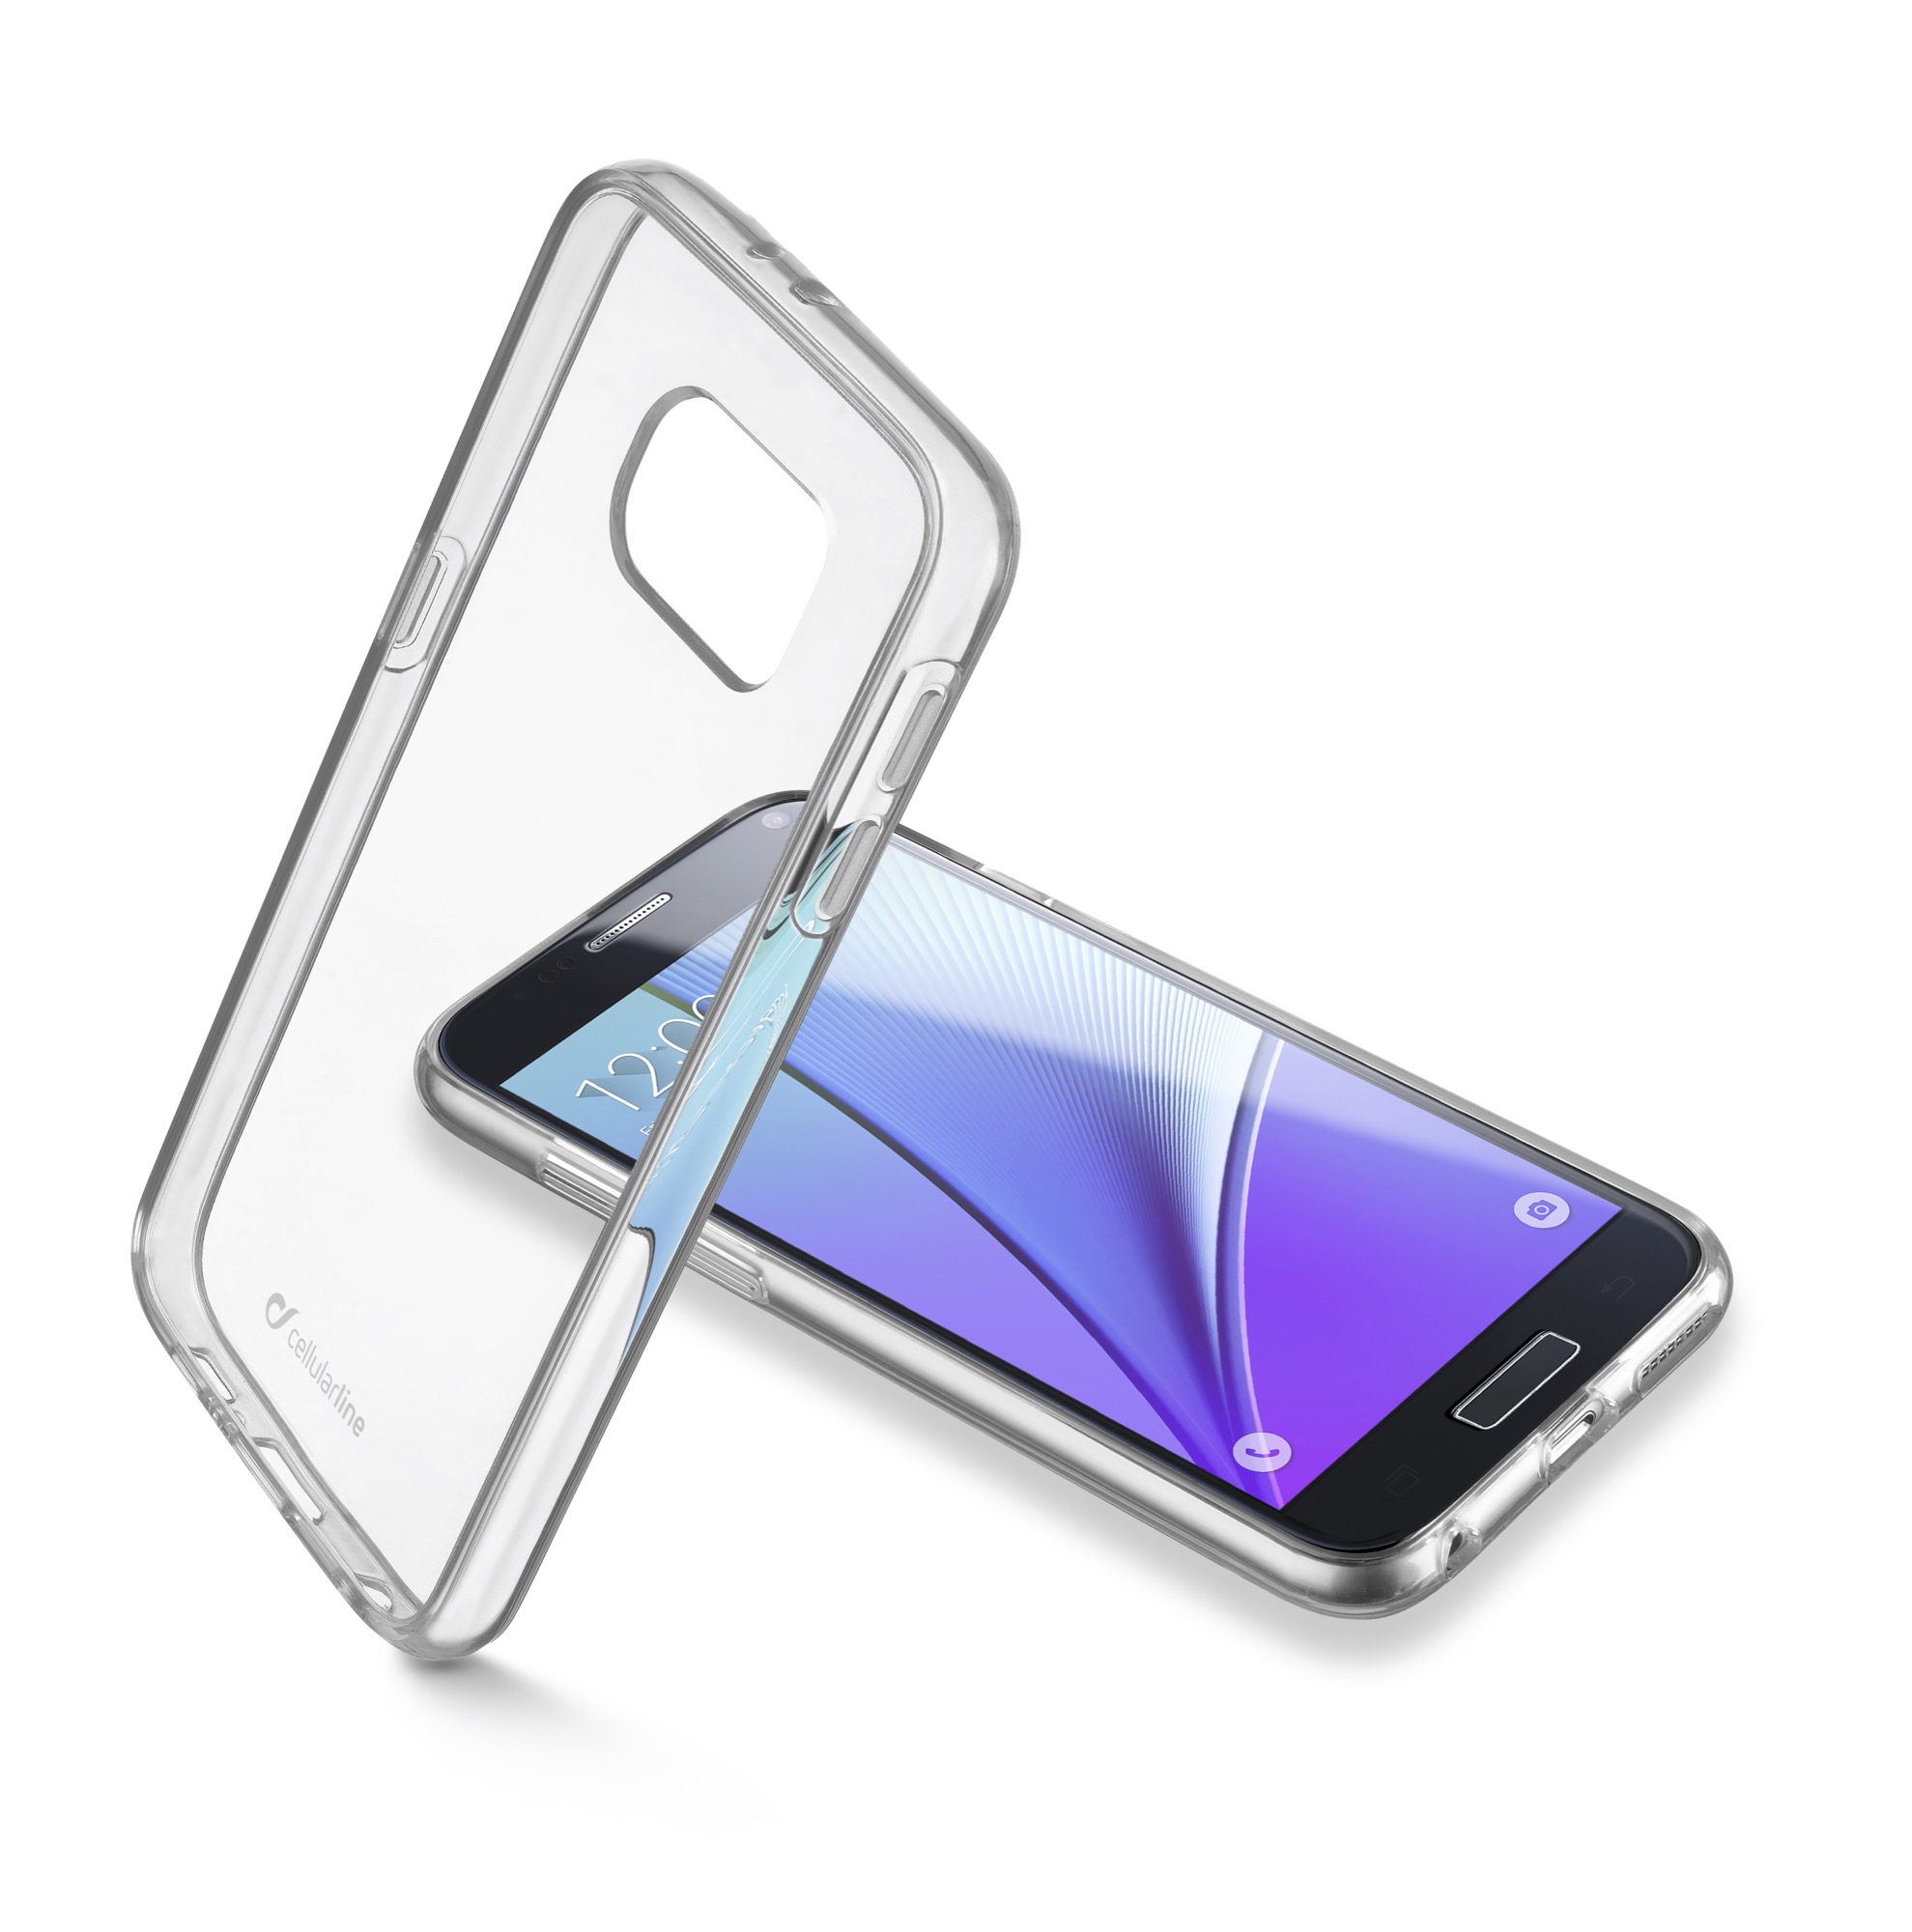 Samsung Galaxy S7, cover, clear duo, transparent